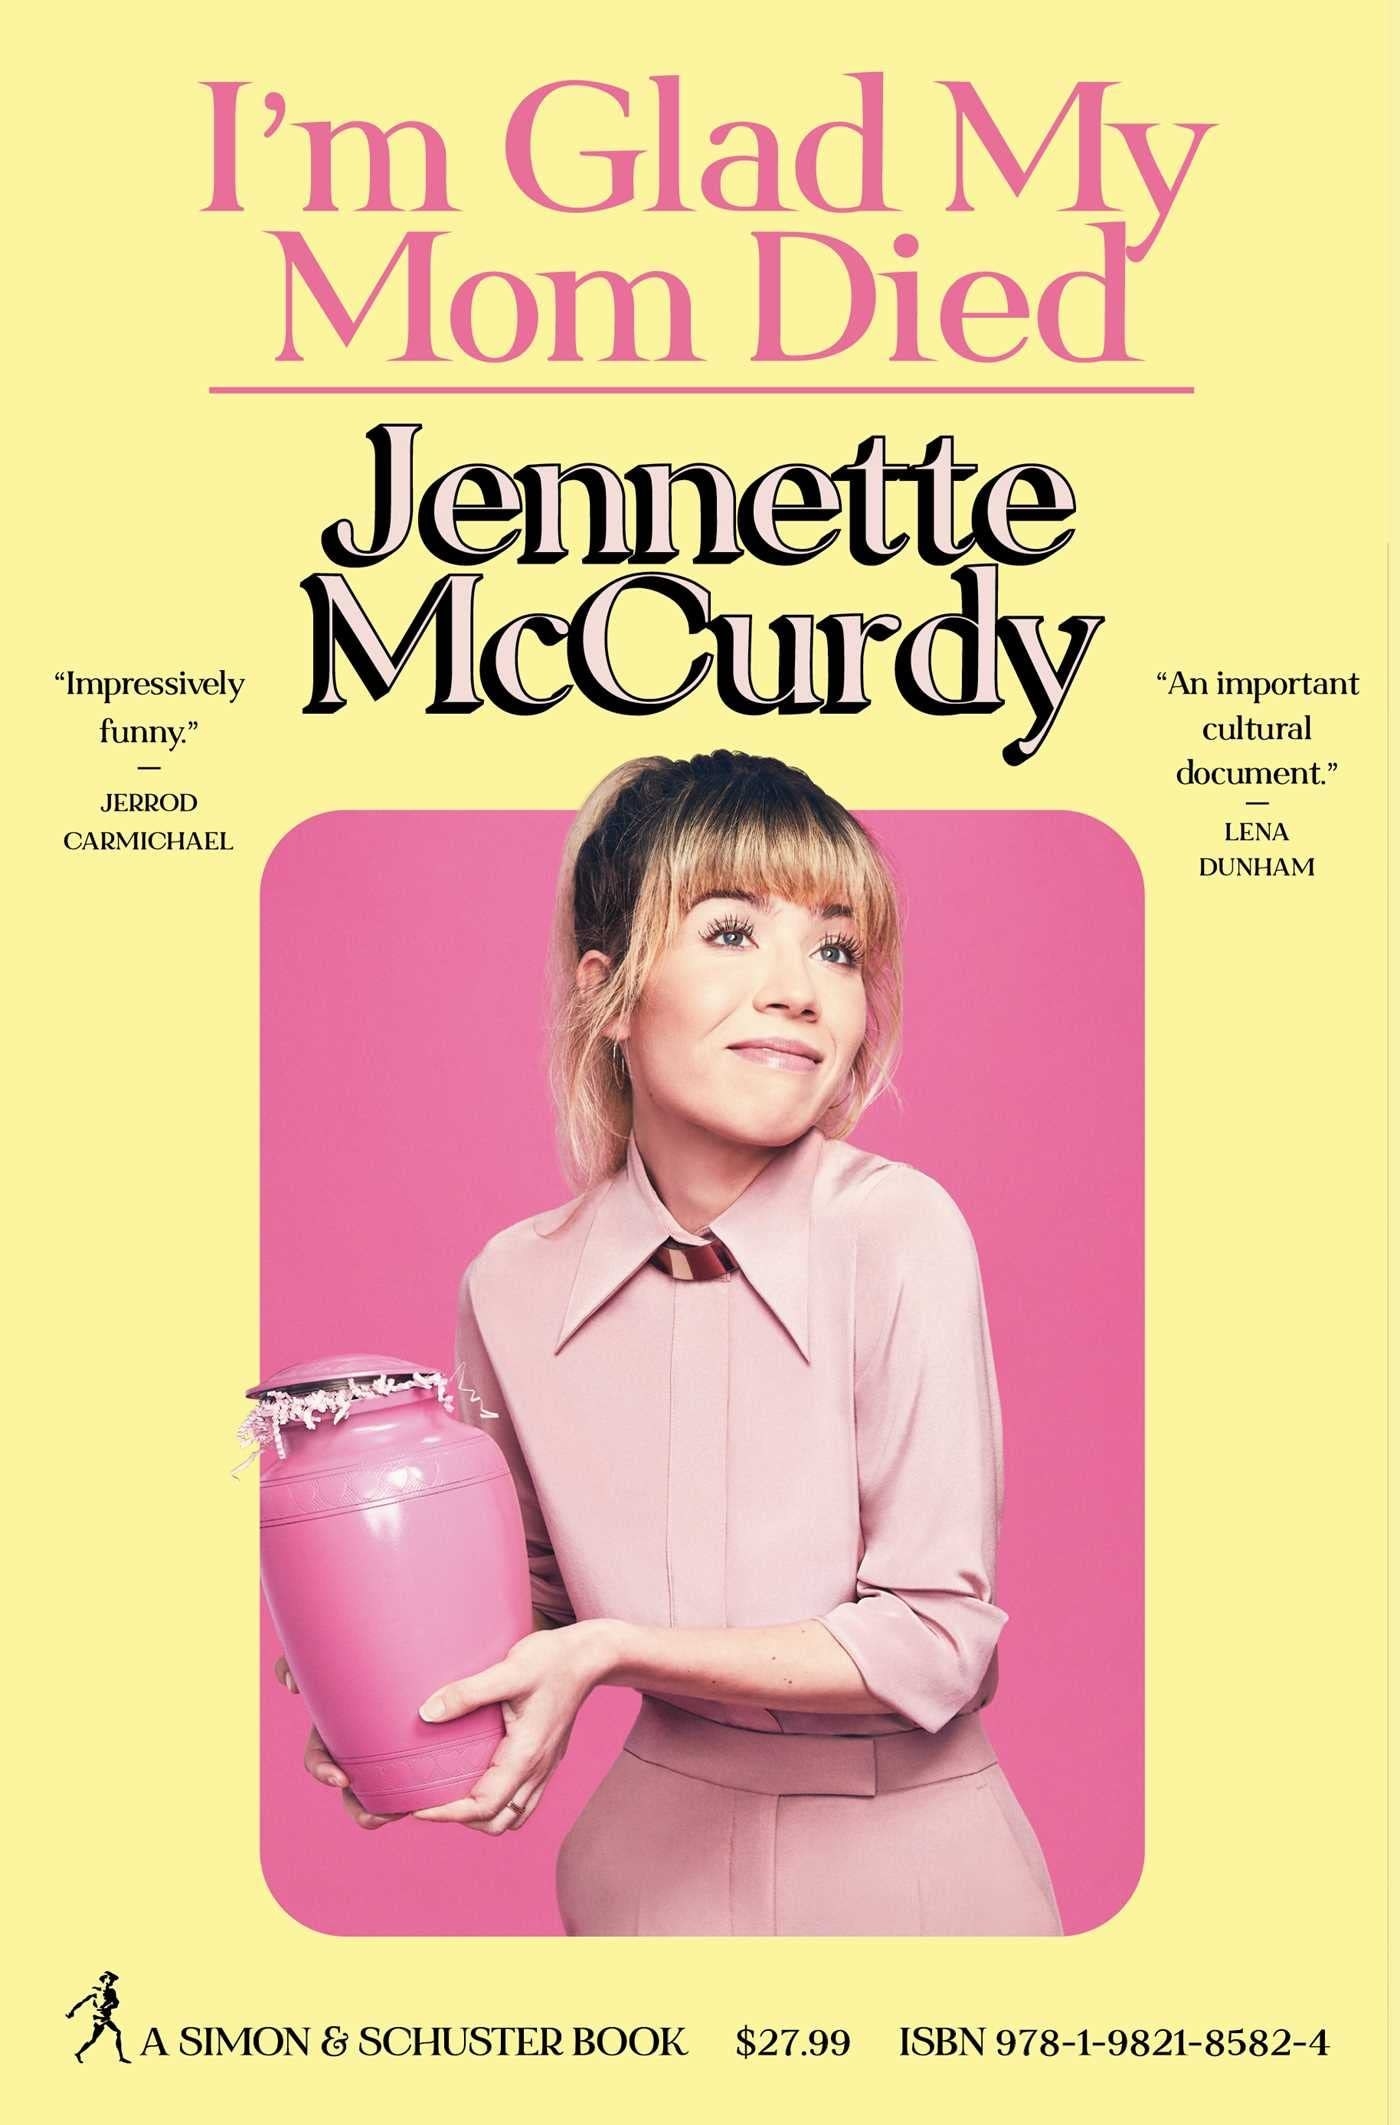 Jeanette McCurdy&#x27;s book cover for &quot;I&#x27;m Glad My Mom Died&quot;